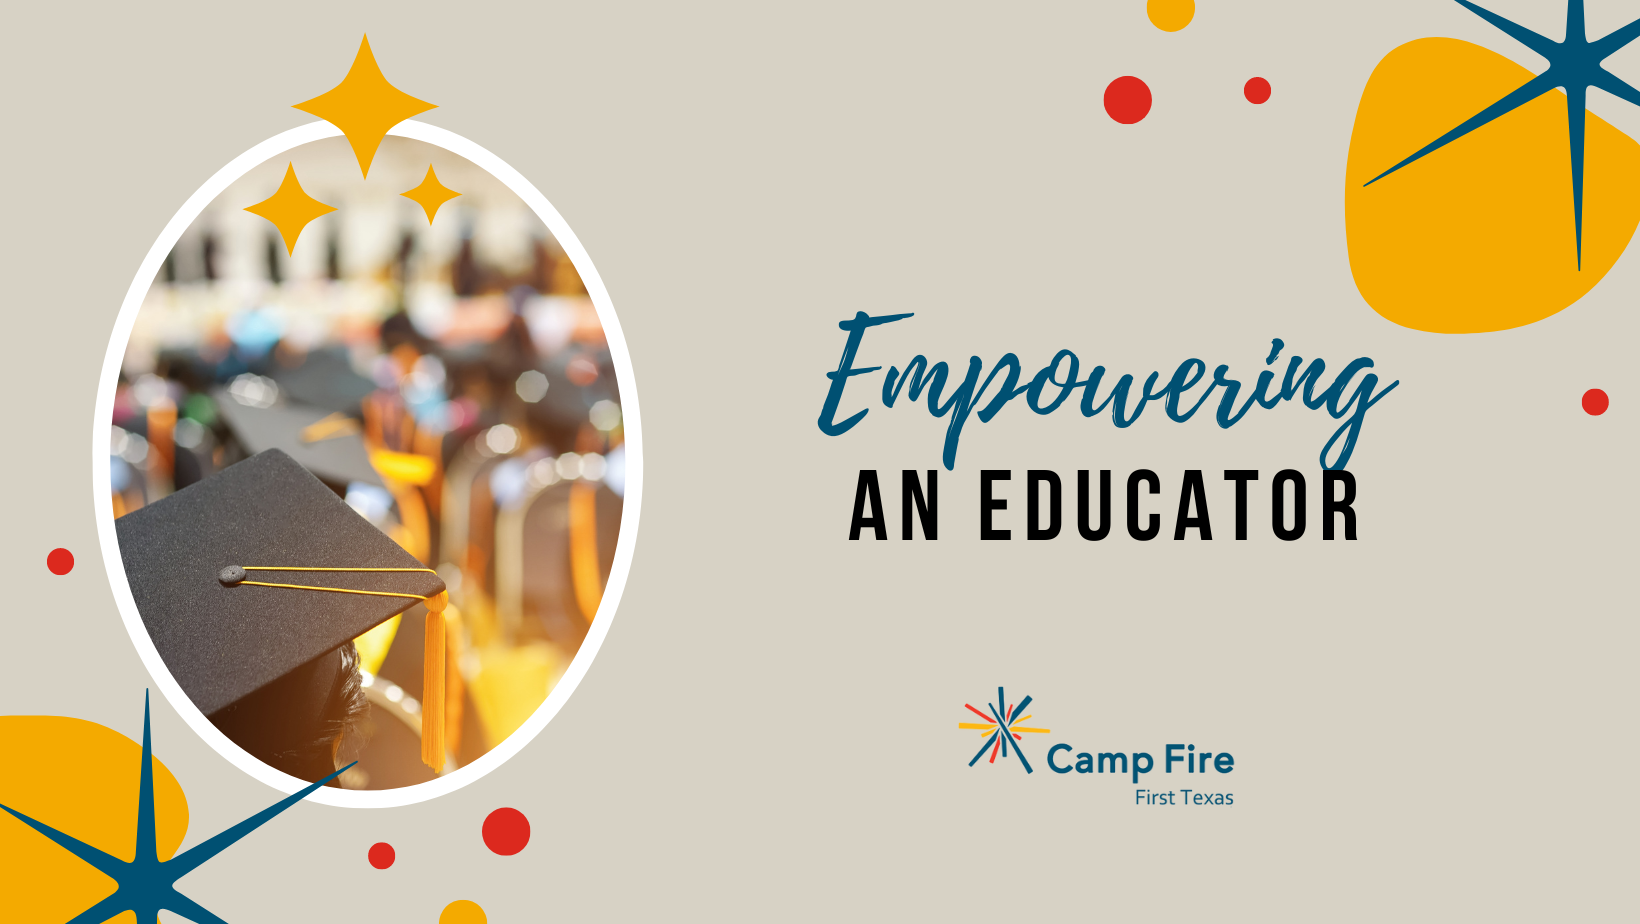 Empowering an Educator, a blog by Maria Sanchez